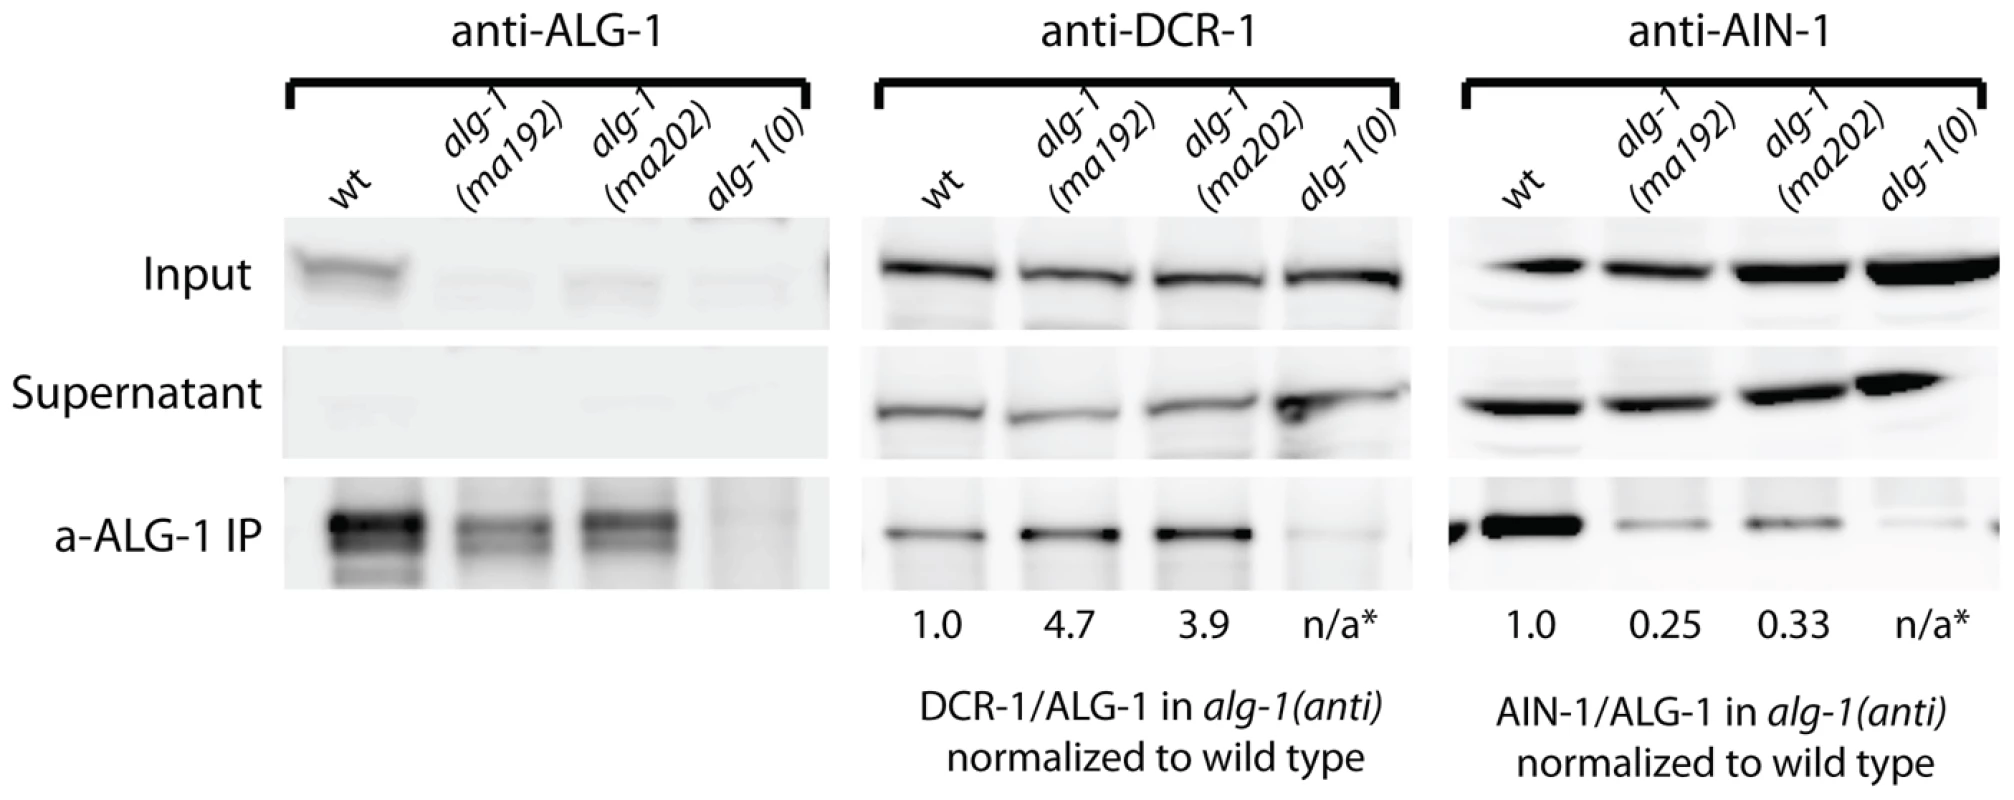 Western blot analysis of ALG-1 immunoprecipitated complexes from extracts of <i>alg-1(anti)</i> and wild type animals.